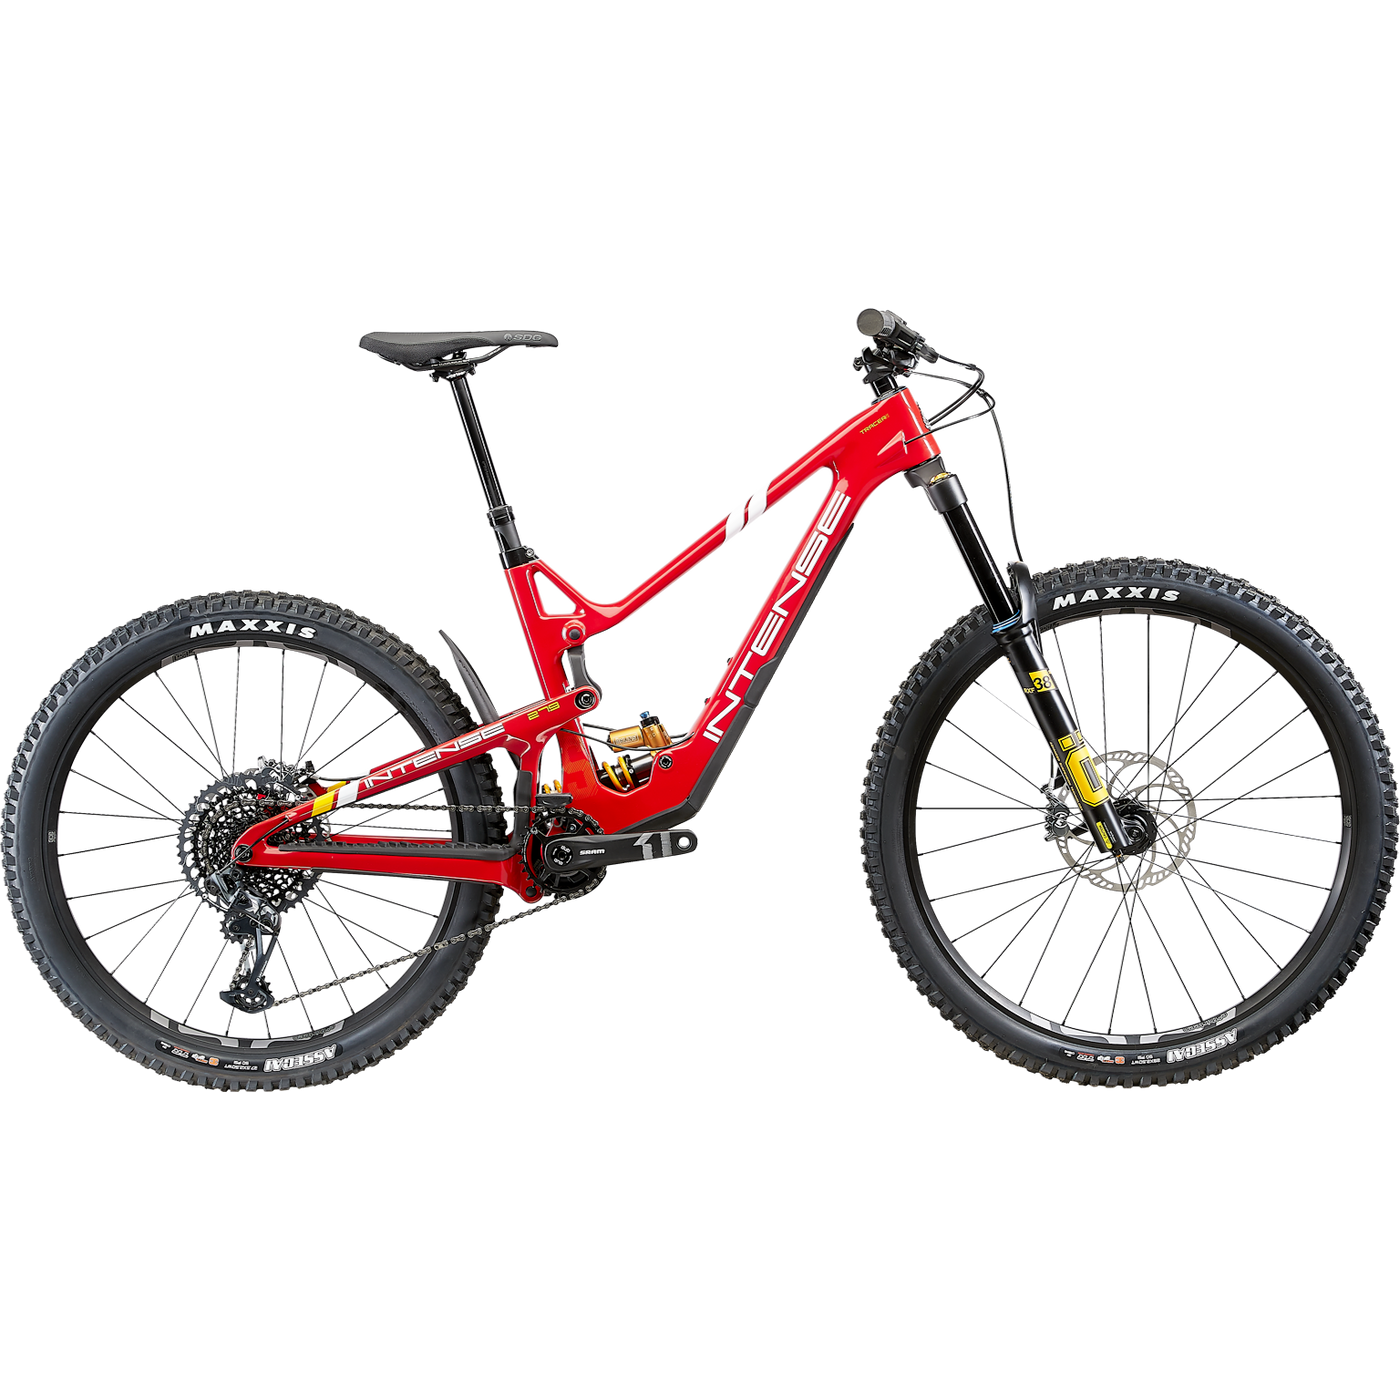 Shop online for the INTENSE Tracer S Carbon Enduro Mountain Bike for sale online or at authorized dealersShop online for the INTENSE Tracer S Carbon Enduro Mountain Bike for sale online or at authorized dealers